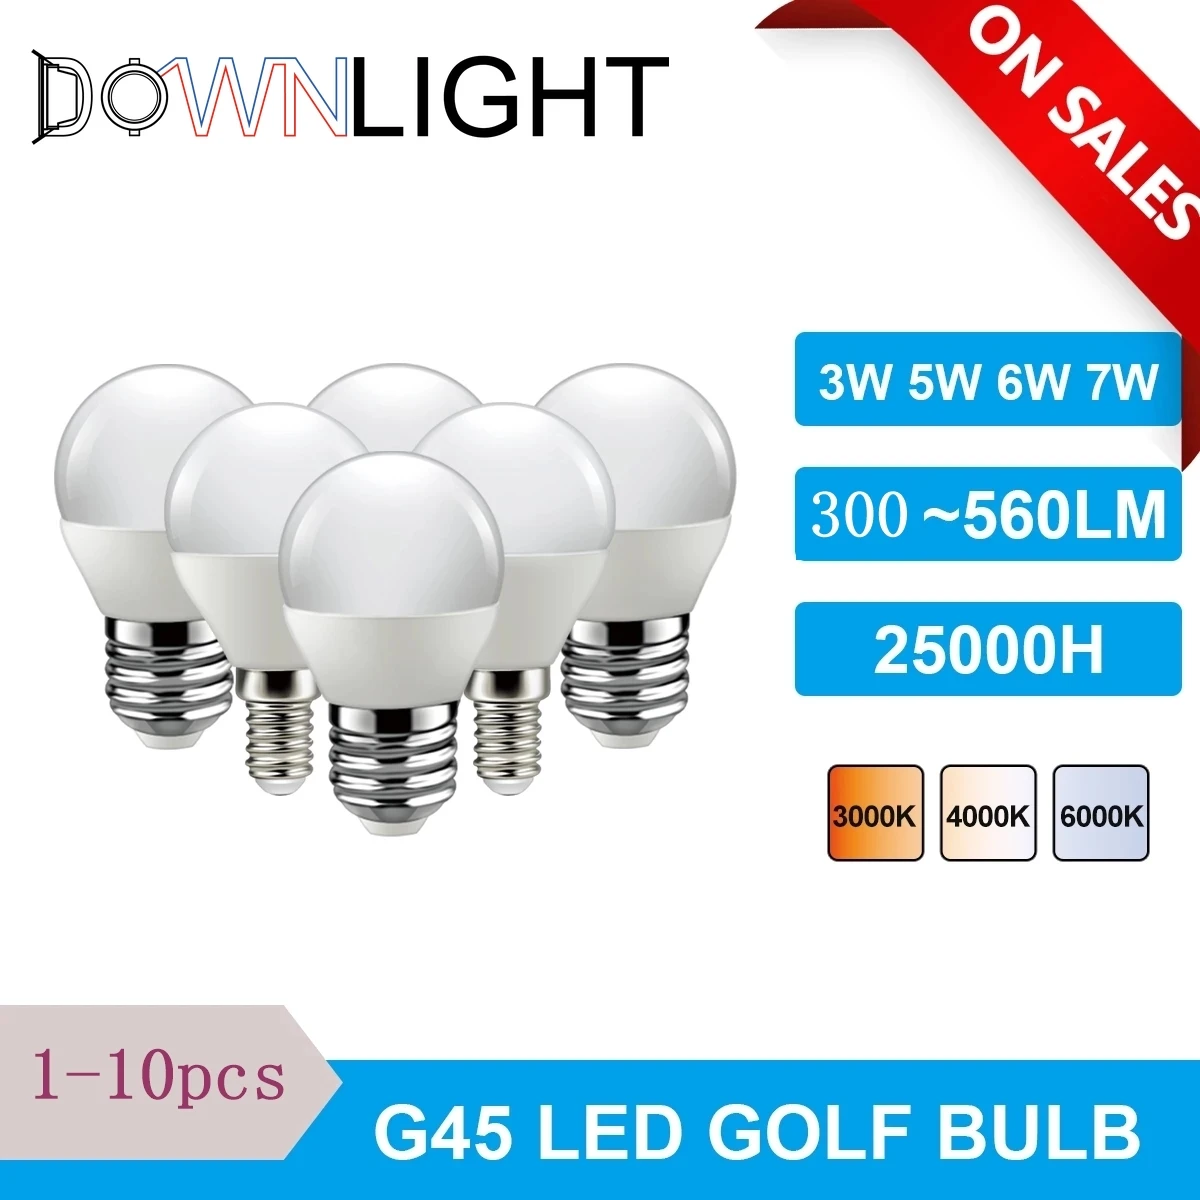 

1-10PCS Led Golf Bulb G45 3W 5W 6W 7W E14 E27 220V 3000K 4000K 6000k Lamp Light For Home Decoration